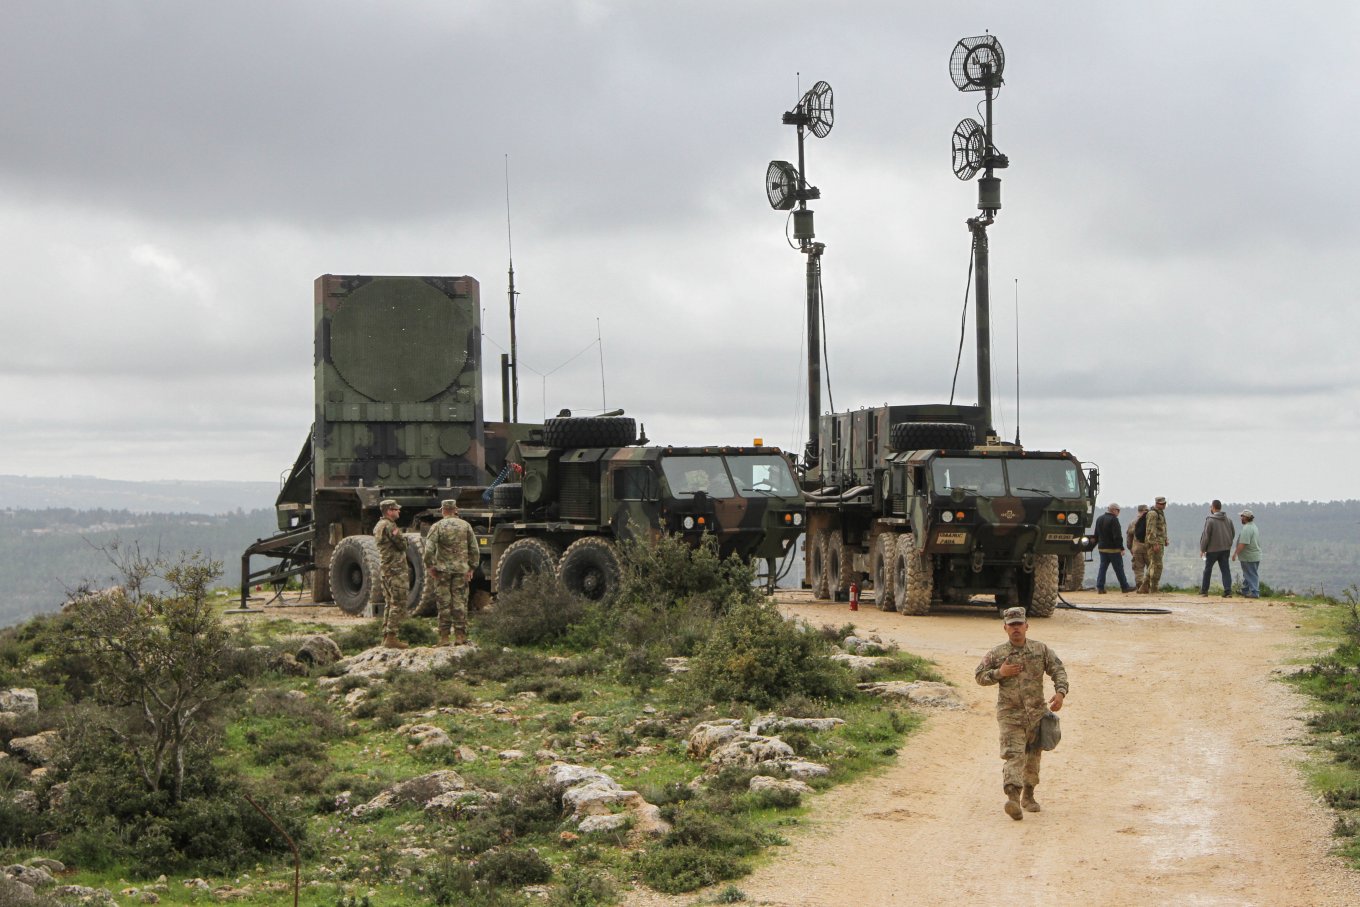 AN/MPQ-53 radar and a communication vehicle of the Patriot system